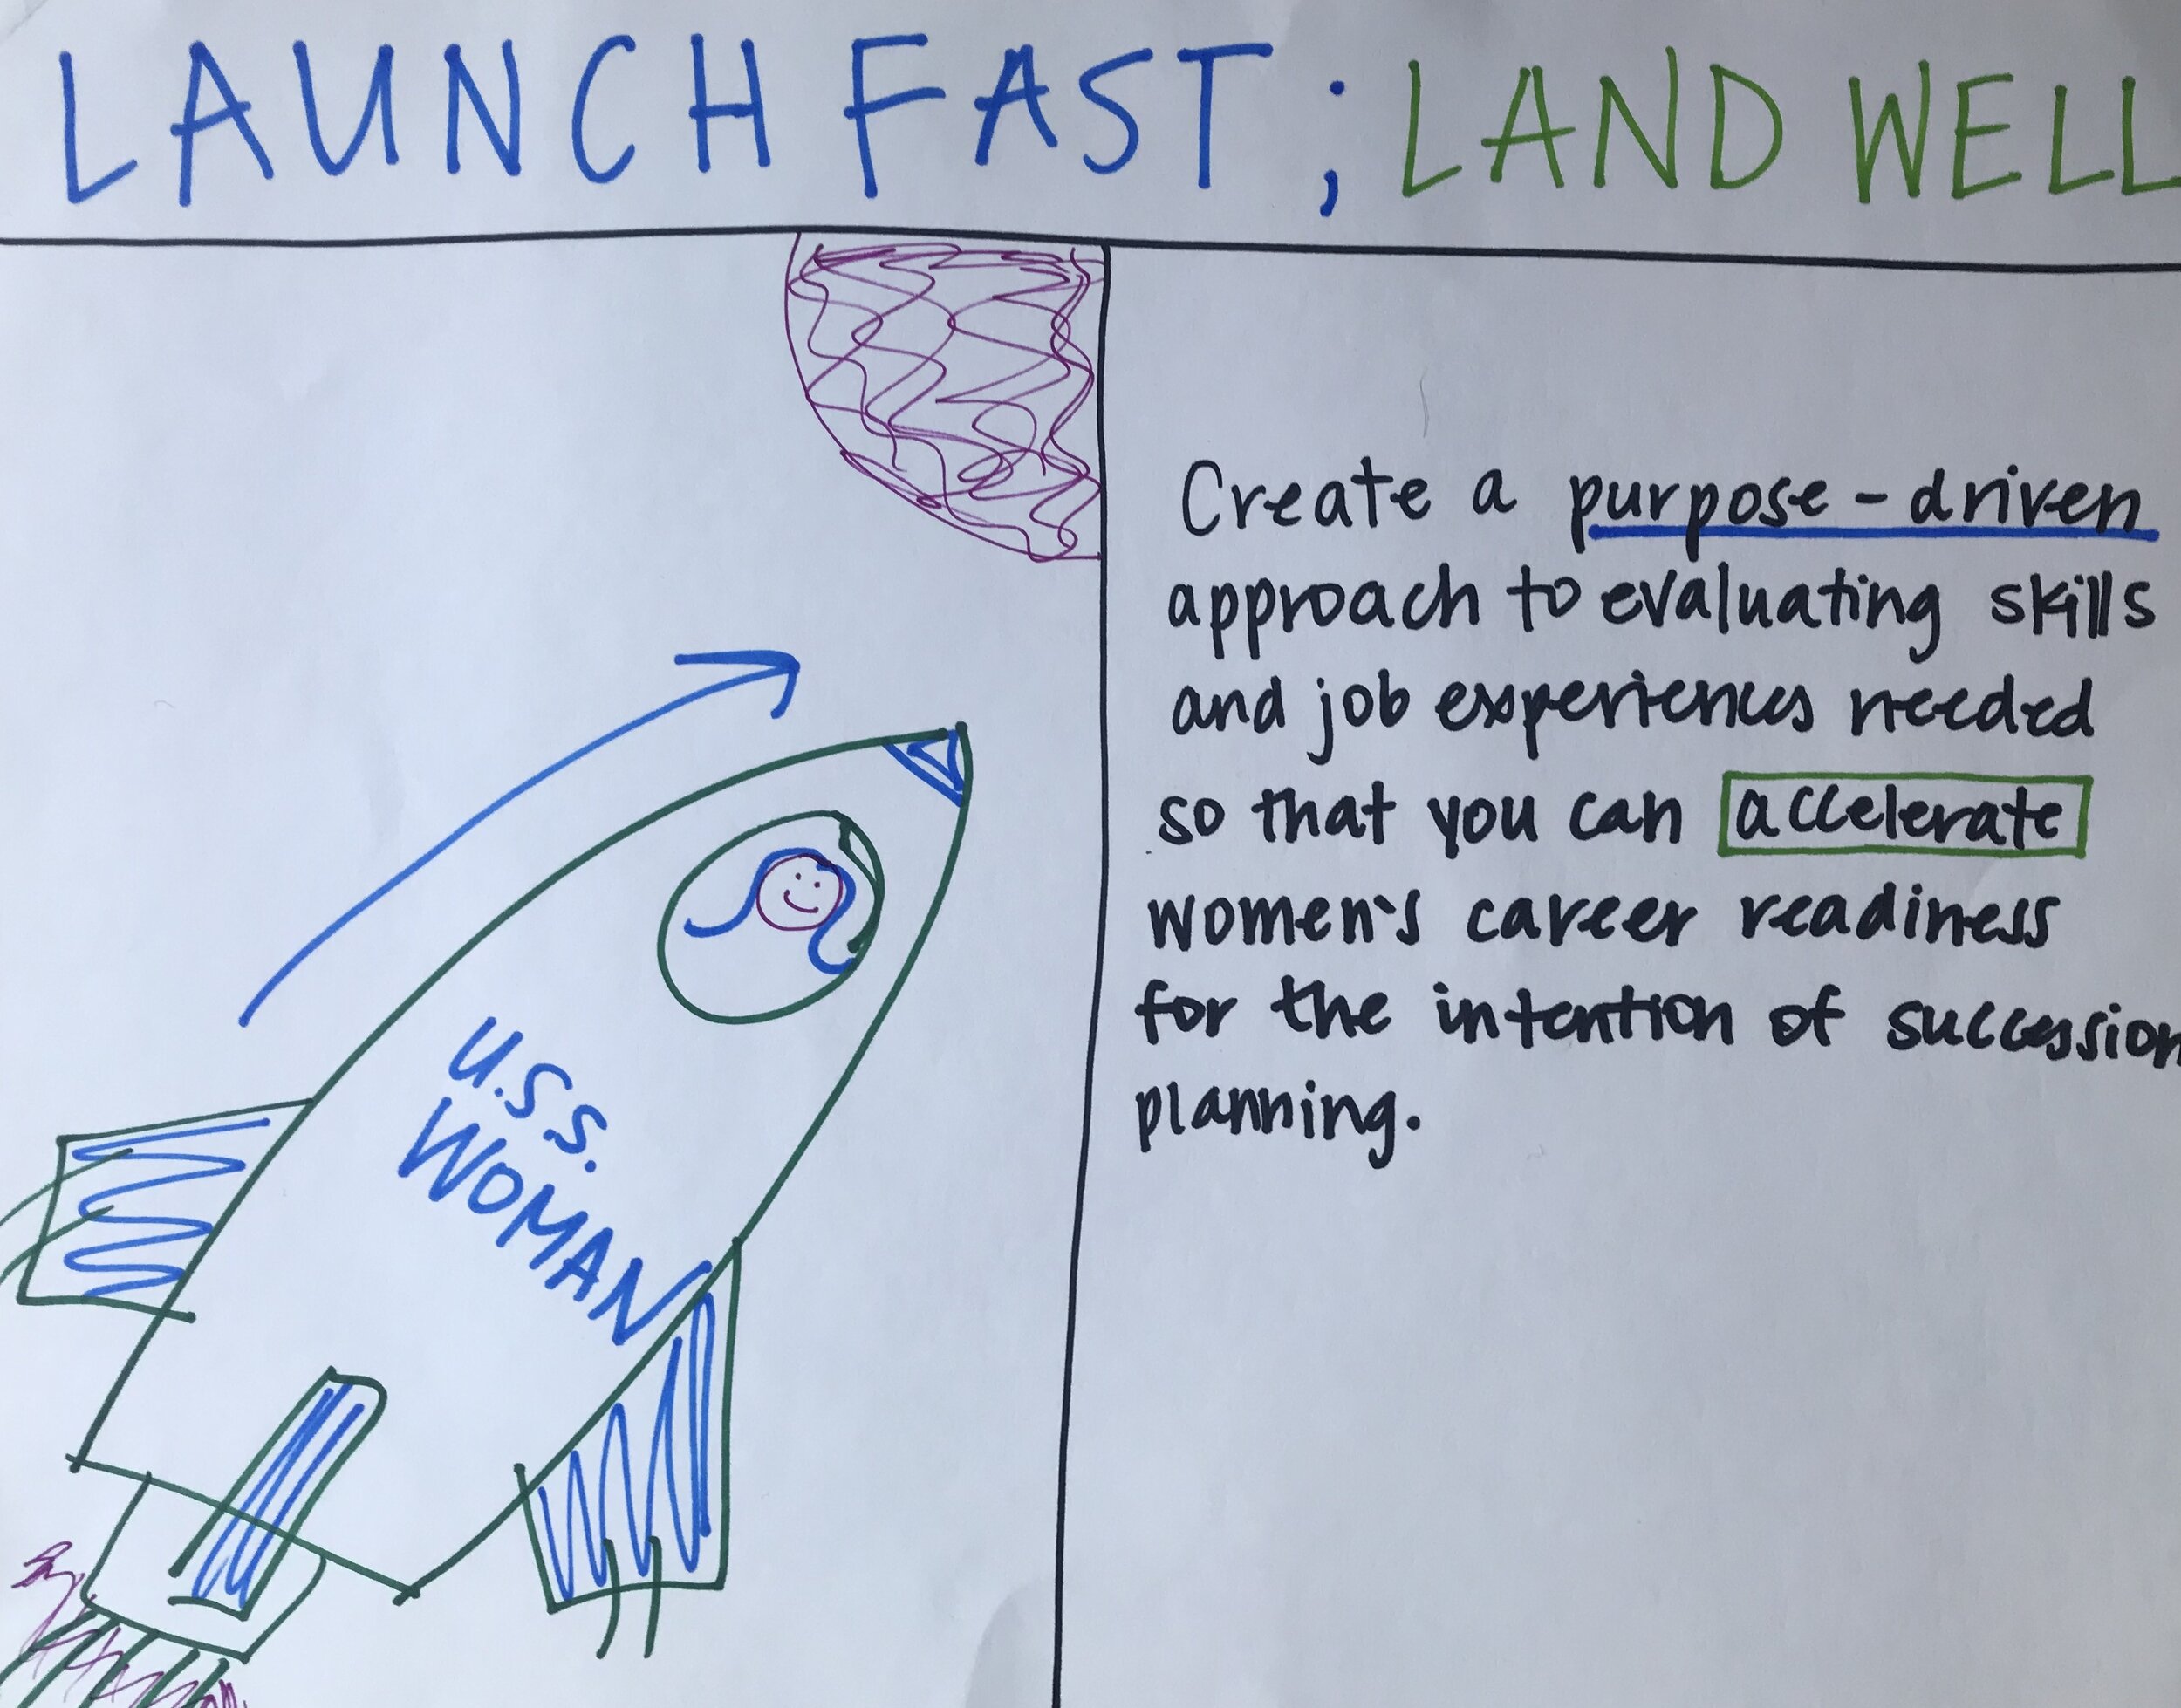 LAUNCH FAST, LAND WELL